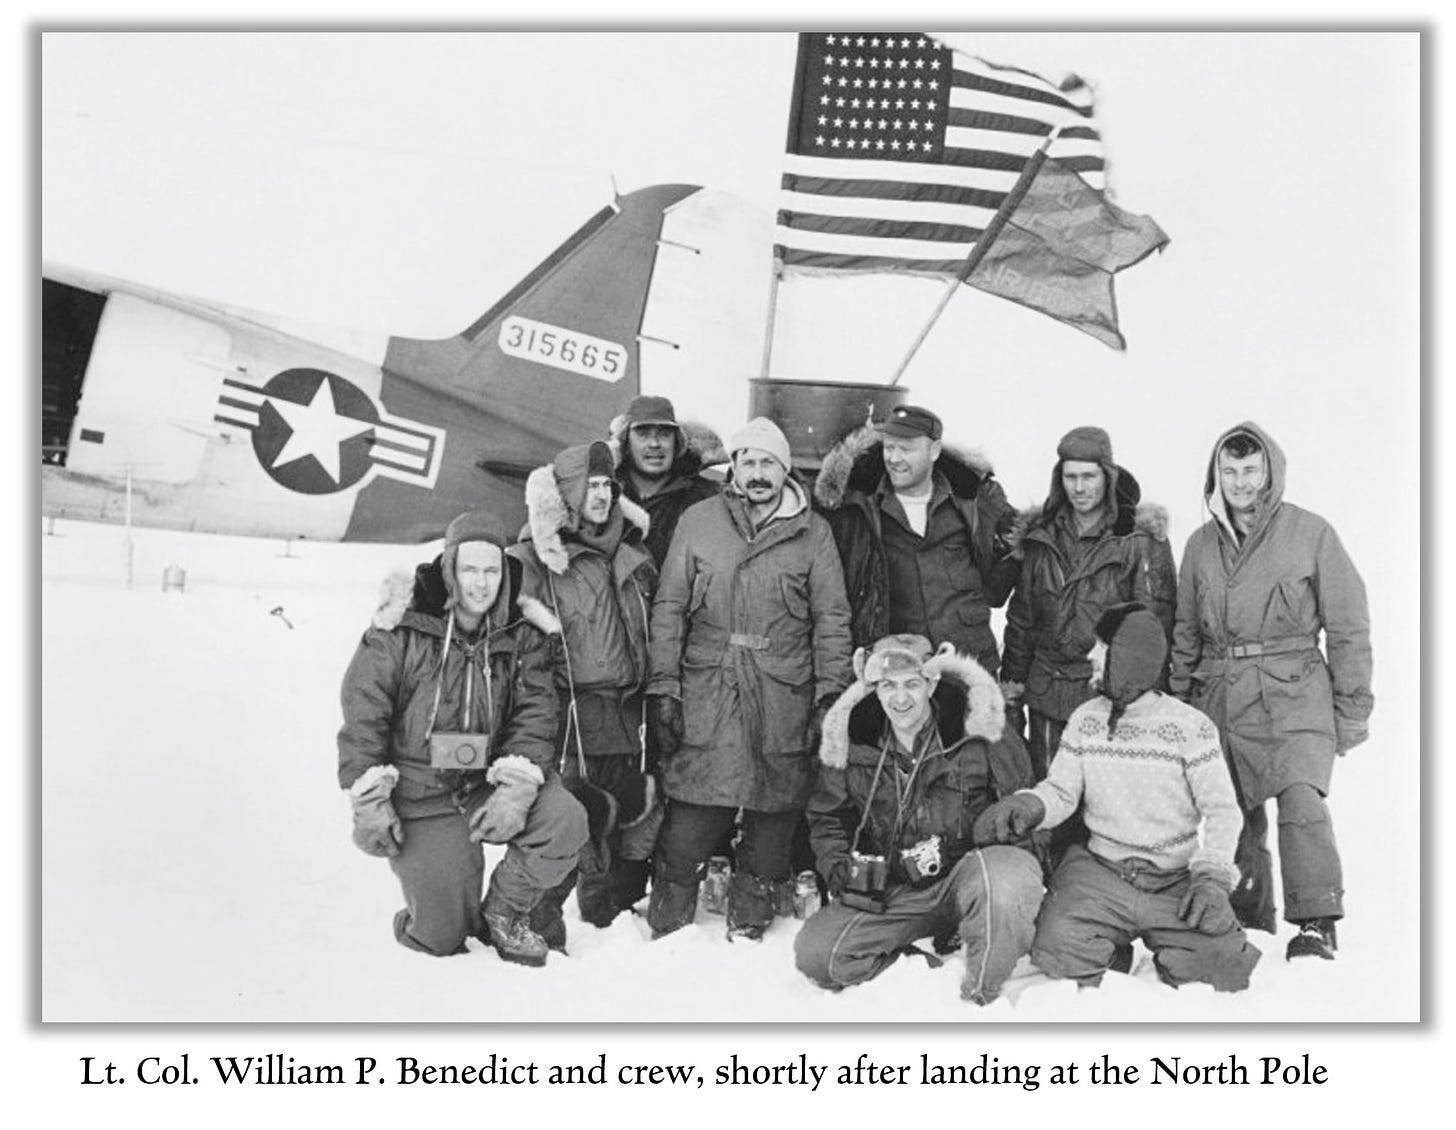 William Benedict and his crew at the North Pole.  His plane is in the background, as is the American flag and Air Force banner that they planted.